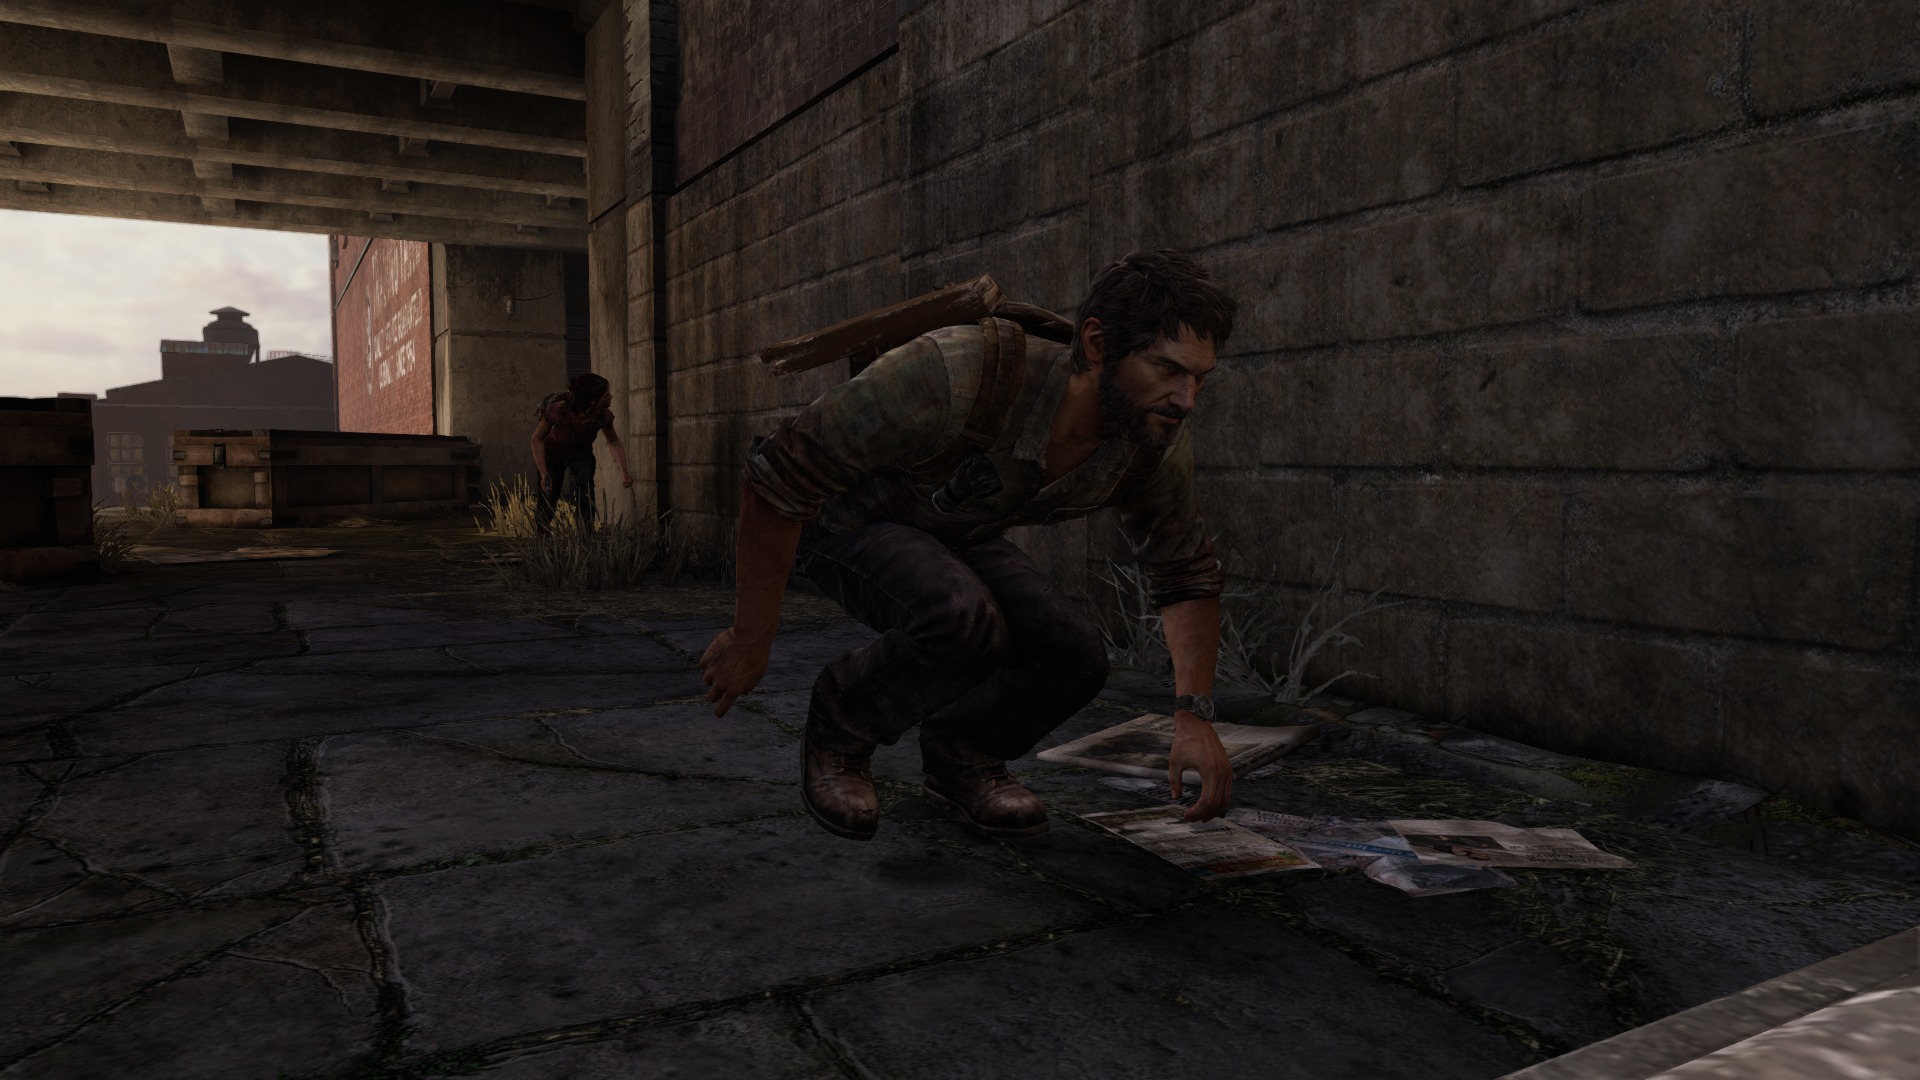 download free the last of us part 1 remastered